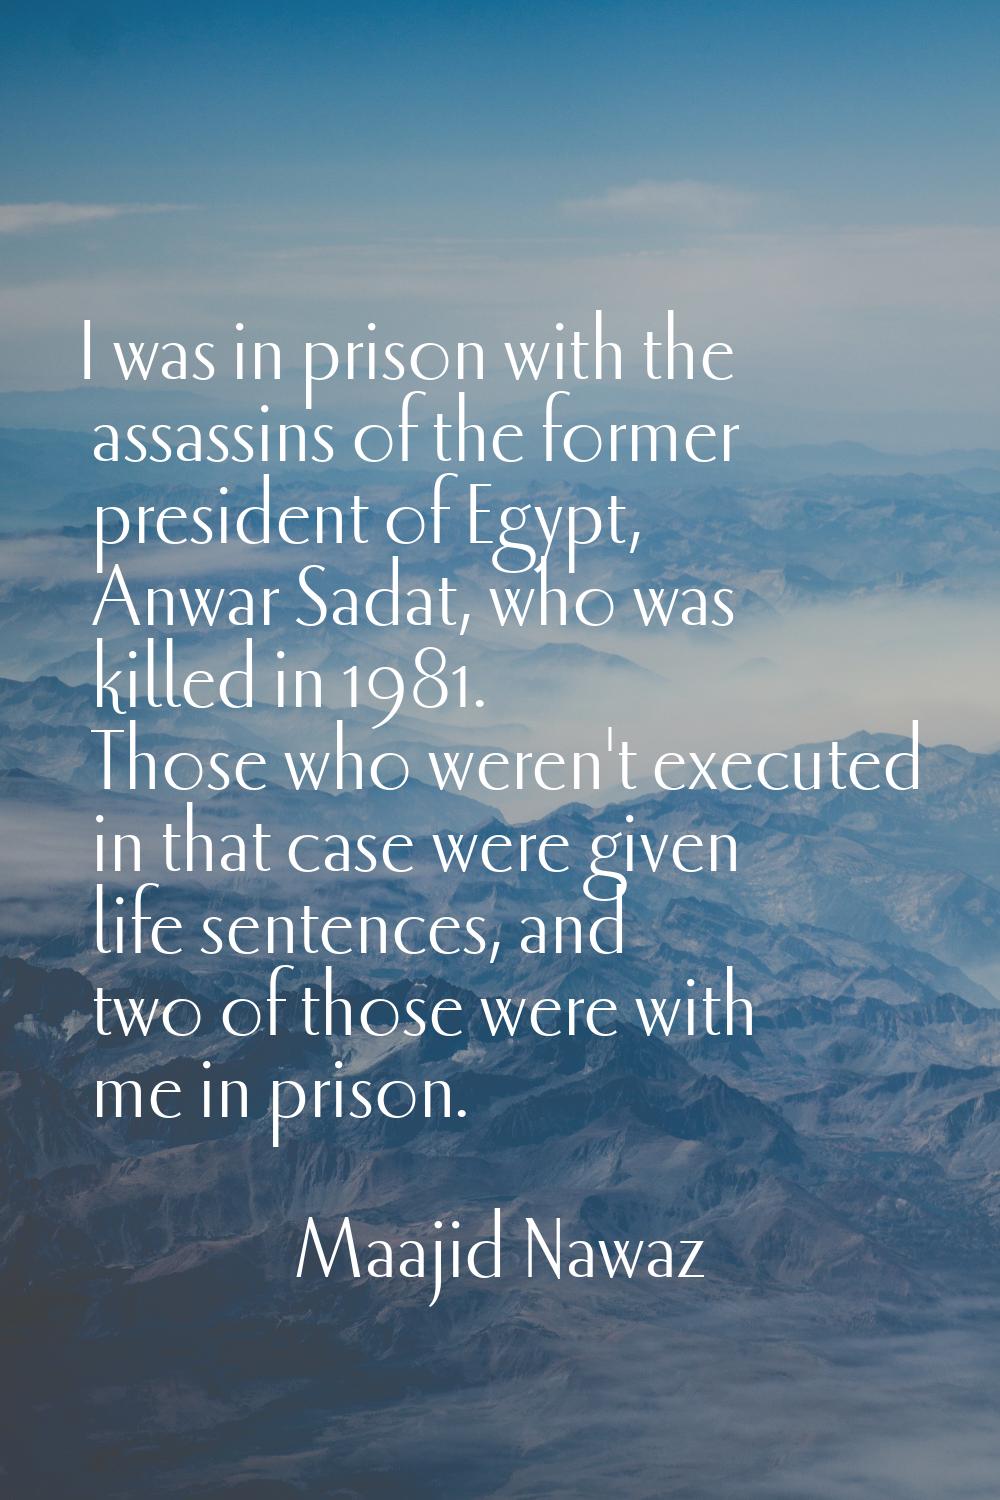 I was in prison with the assassins of the former president of Egypt, Anwar Sadat, who was killed in